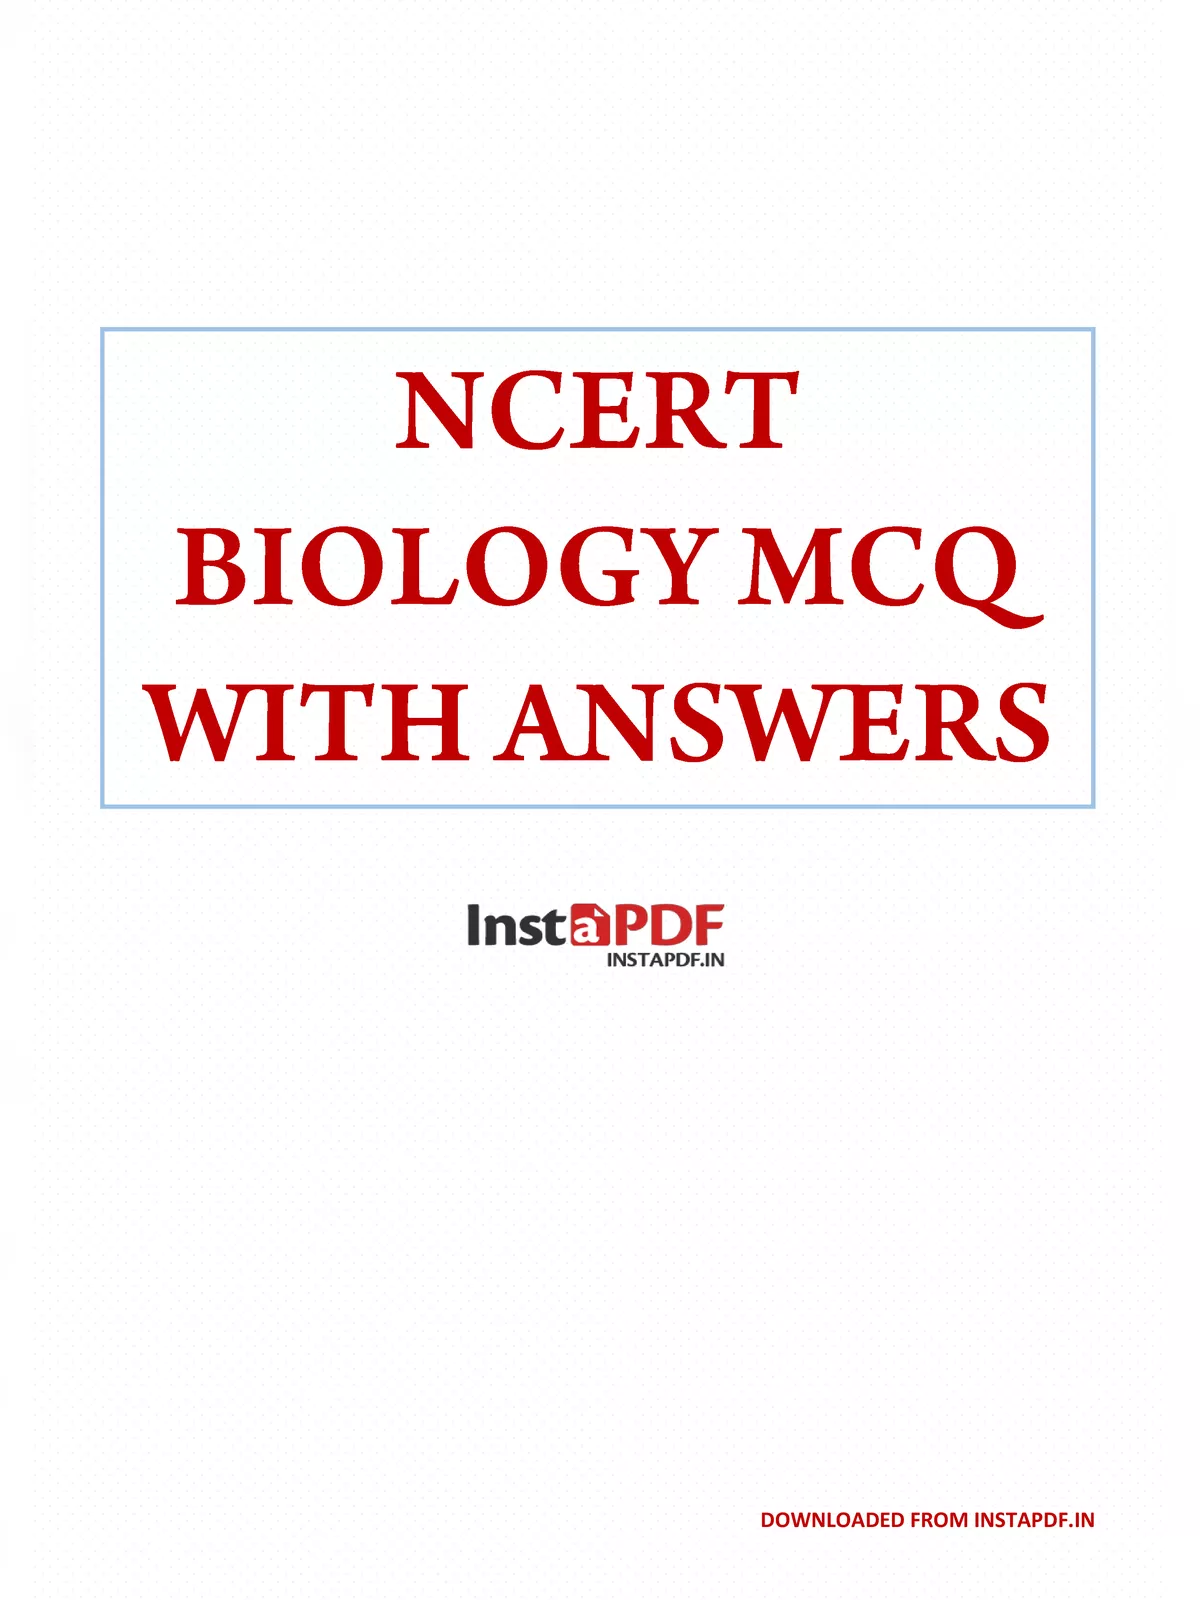 NCERT Biology MCQ with Answers